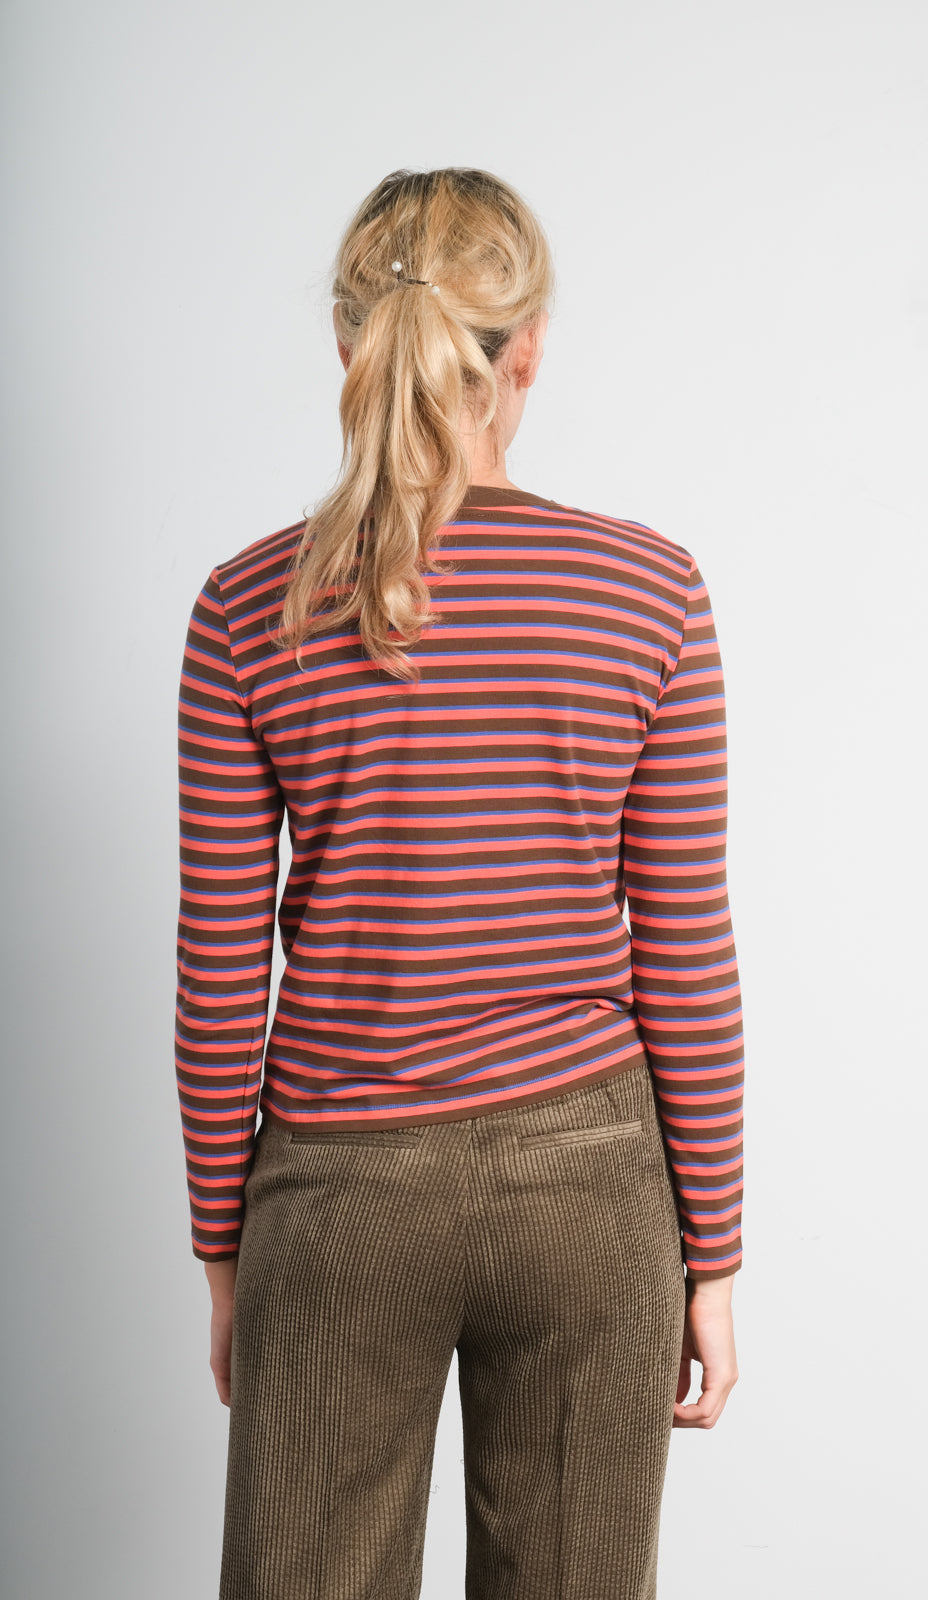 LOR Luxe stripe top in toffee